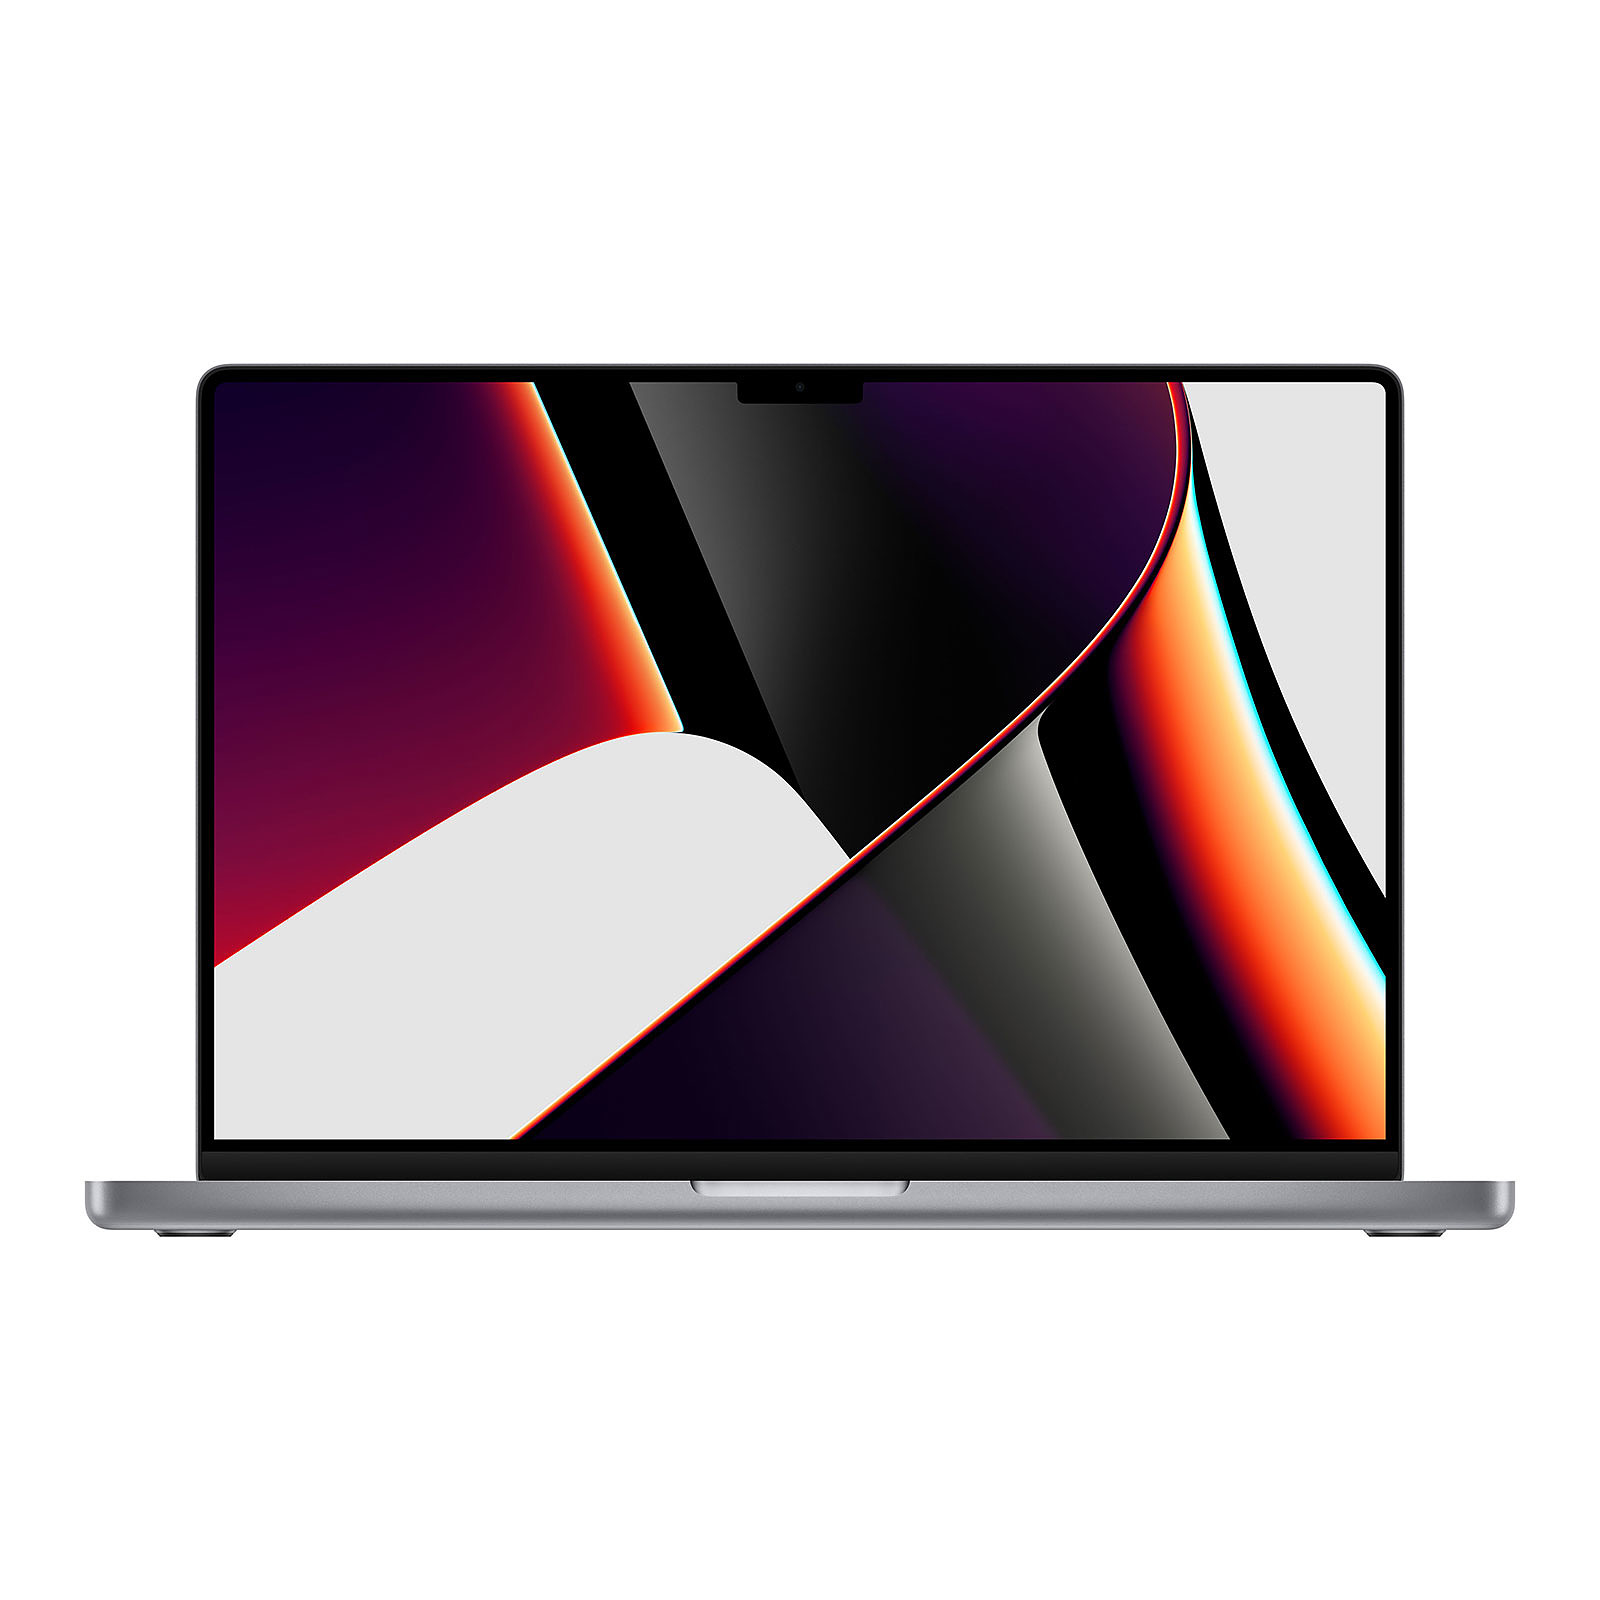 Apple MacBook Pro M1 Max (2021) 16" Gris sideral 32Go/4To (MK1A3FN/A-32GB-4TB) - MacBook Apple